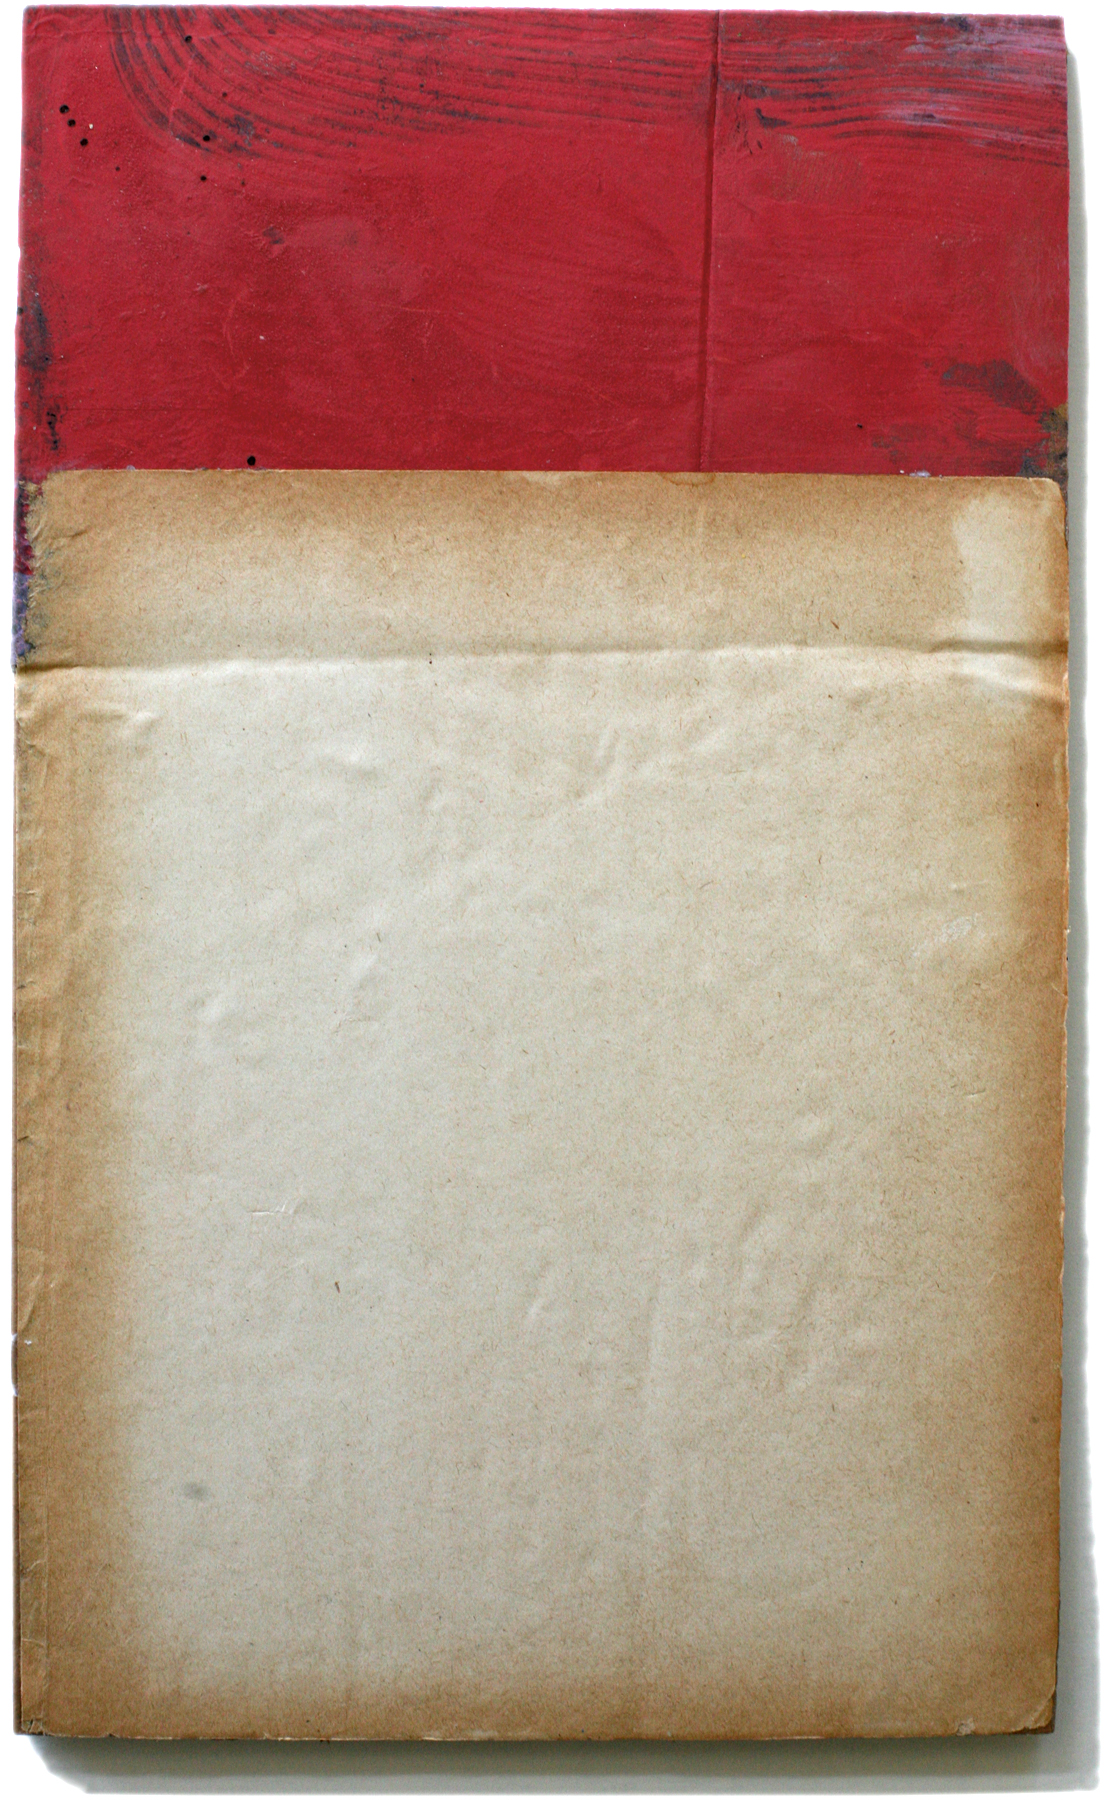 Rothko, 10" x 6", 2008-2010 (private collection)